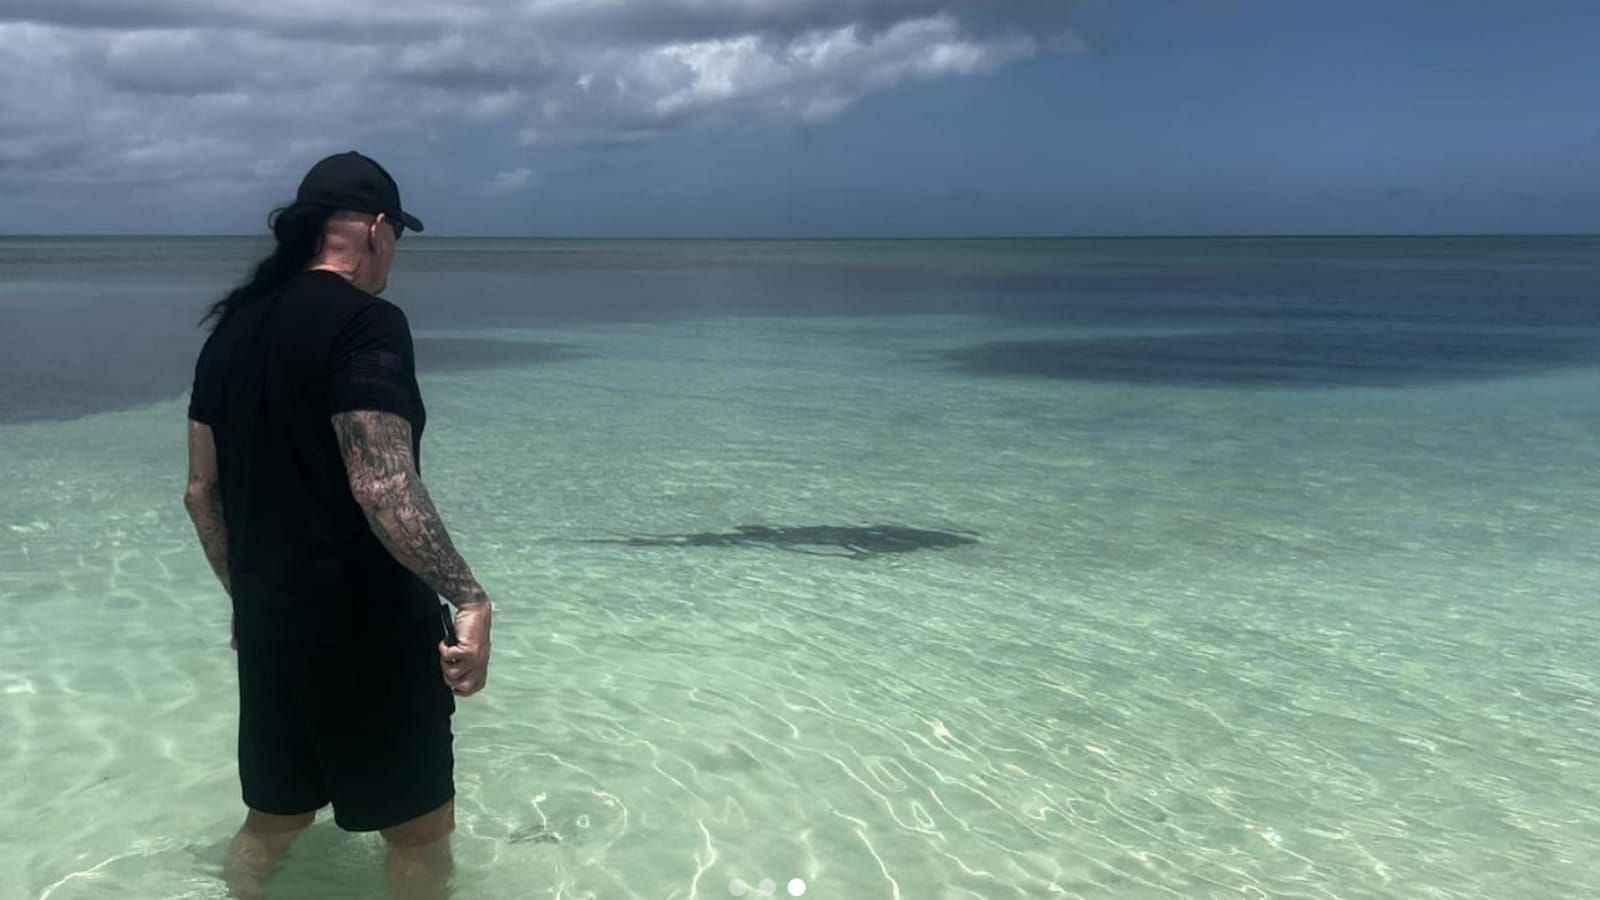 Even the sharks are scared of The Deadman.